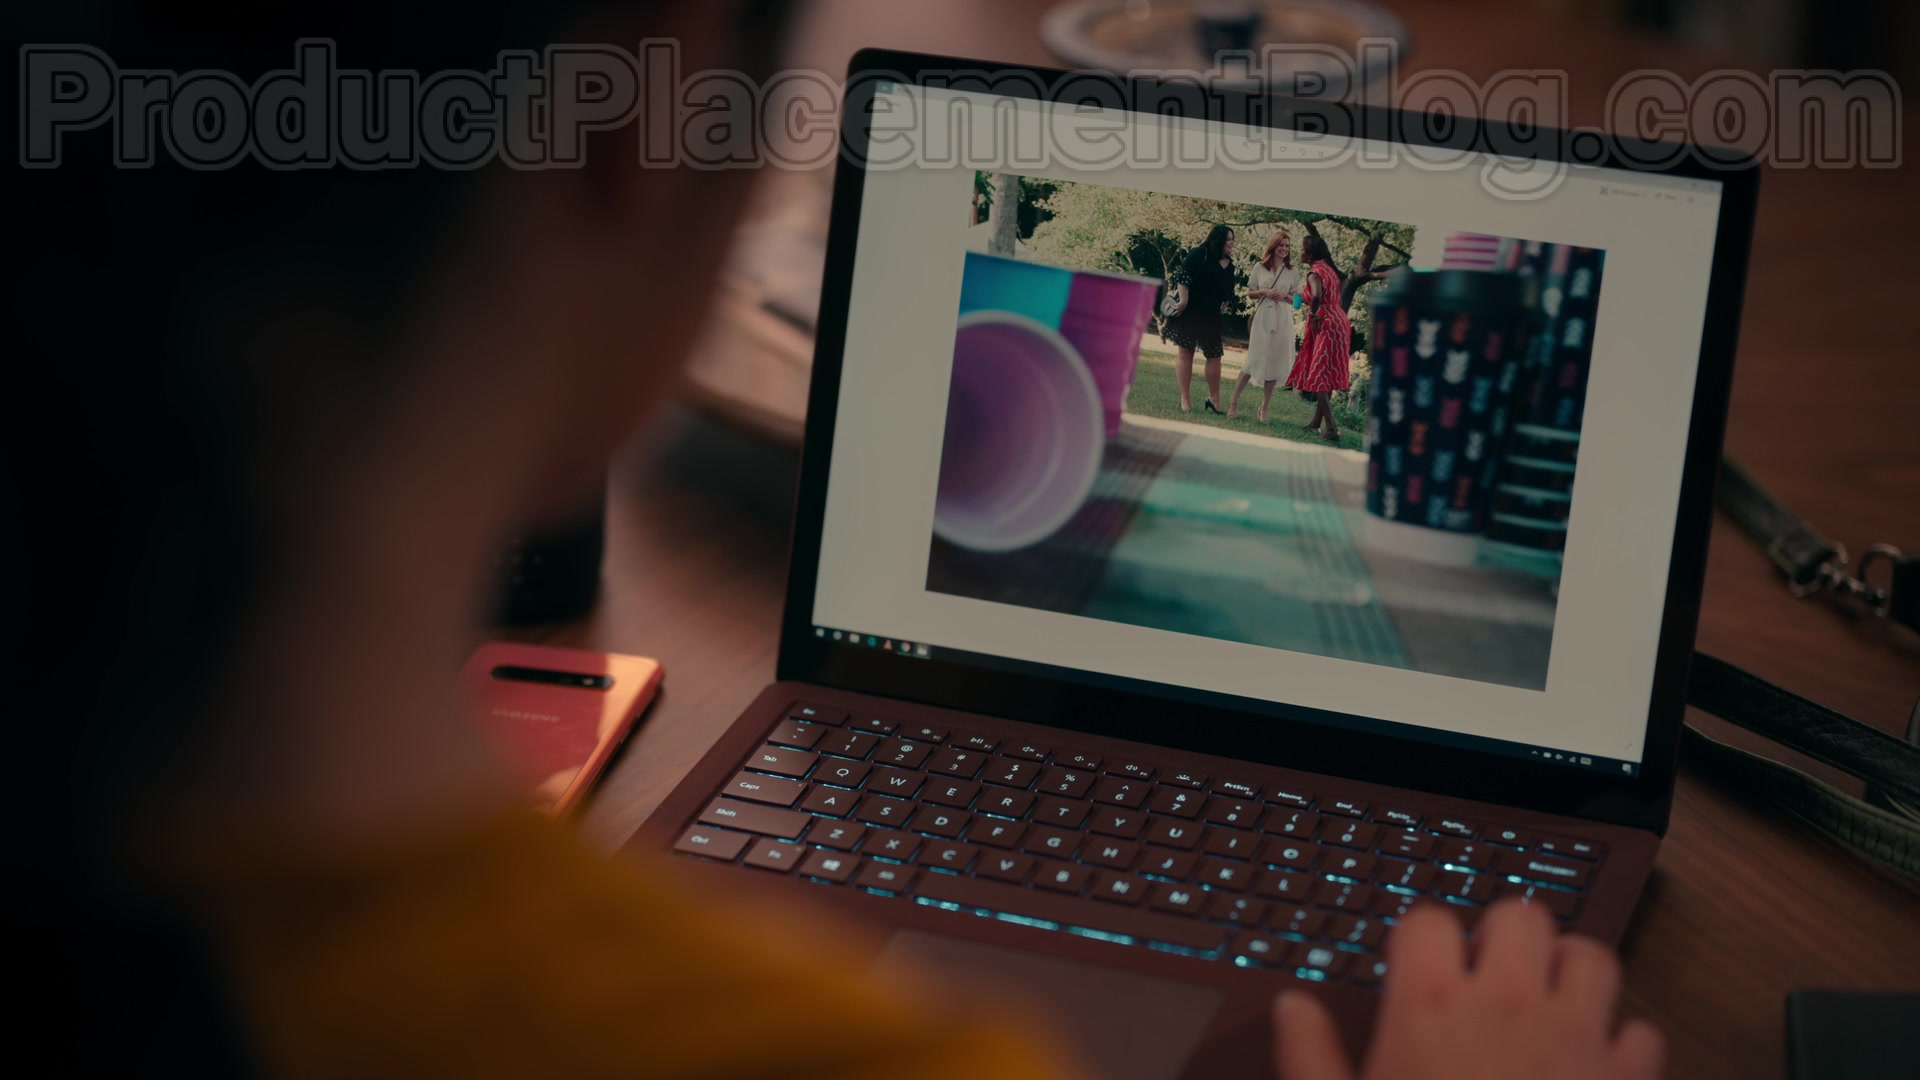 Samsung-Galaxy-Smartphone-and-Microsoft-Surface-Laptop-in-Sweet-Magnolias-S01E01-Pour-It-Out-2020.jpg